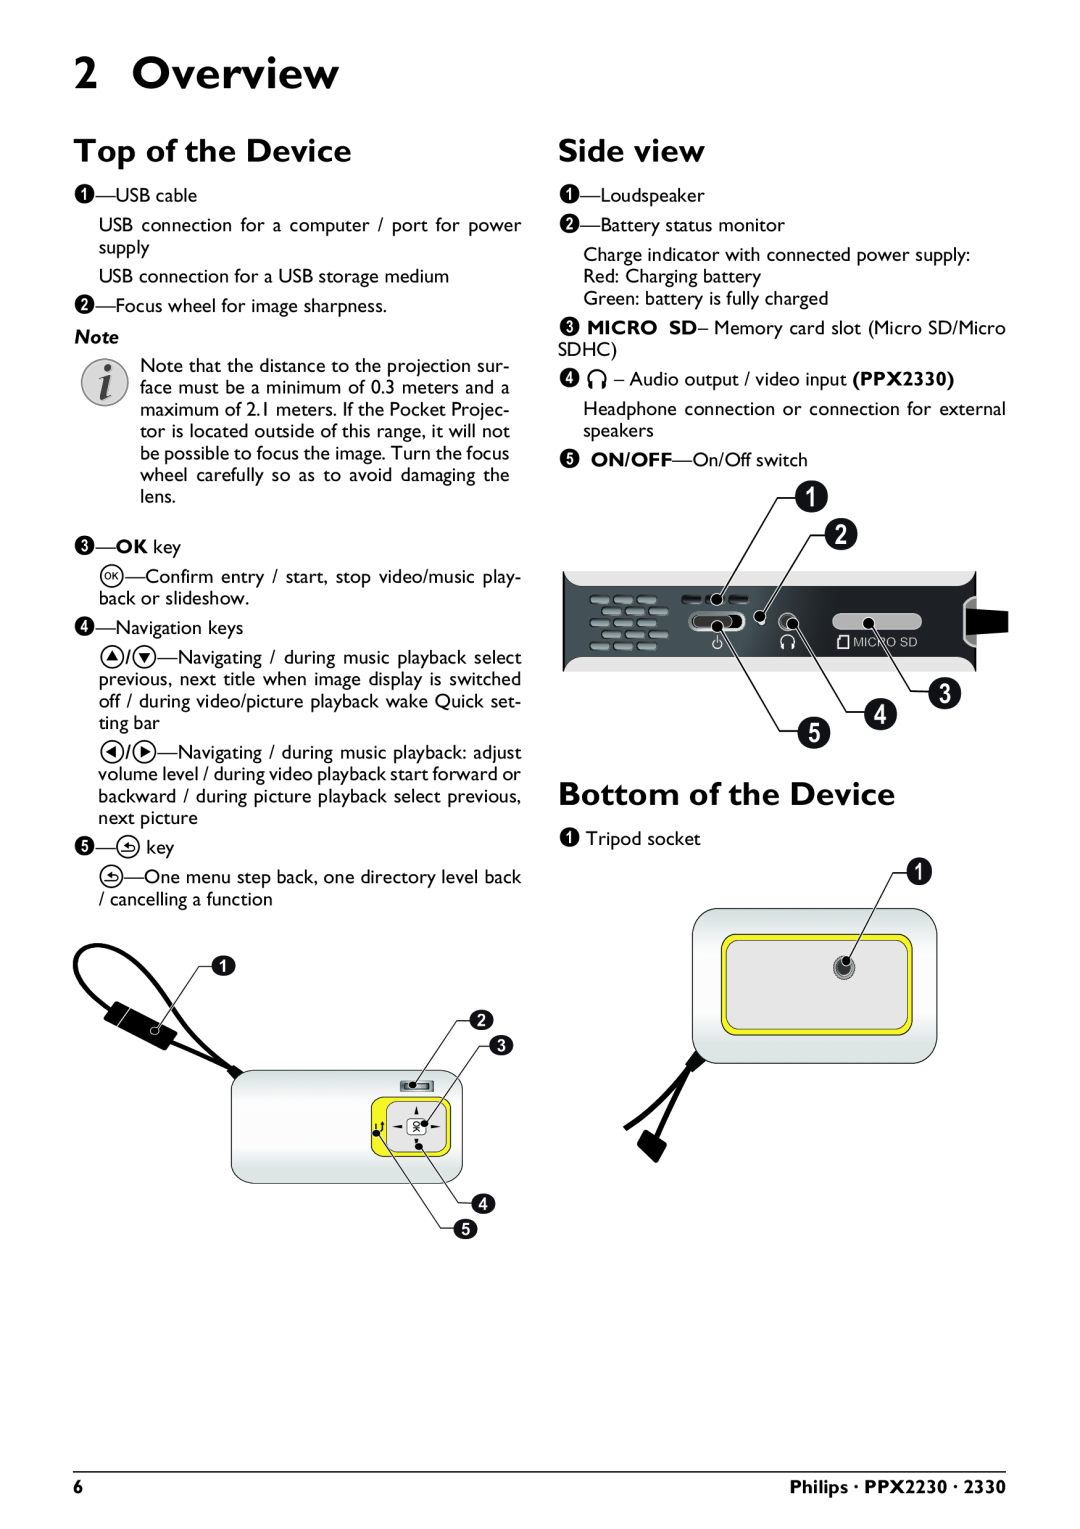 Philips PPX2330, PPX2230 user manual Overview, Top of the Device, Side view, Bottom of the Device, a b e d c, a b c d e 